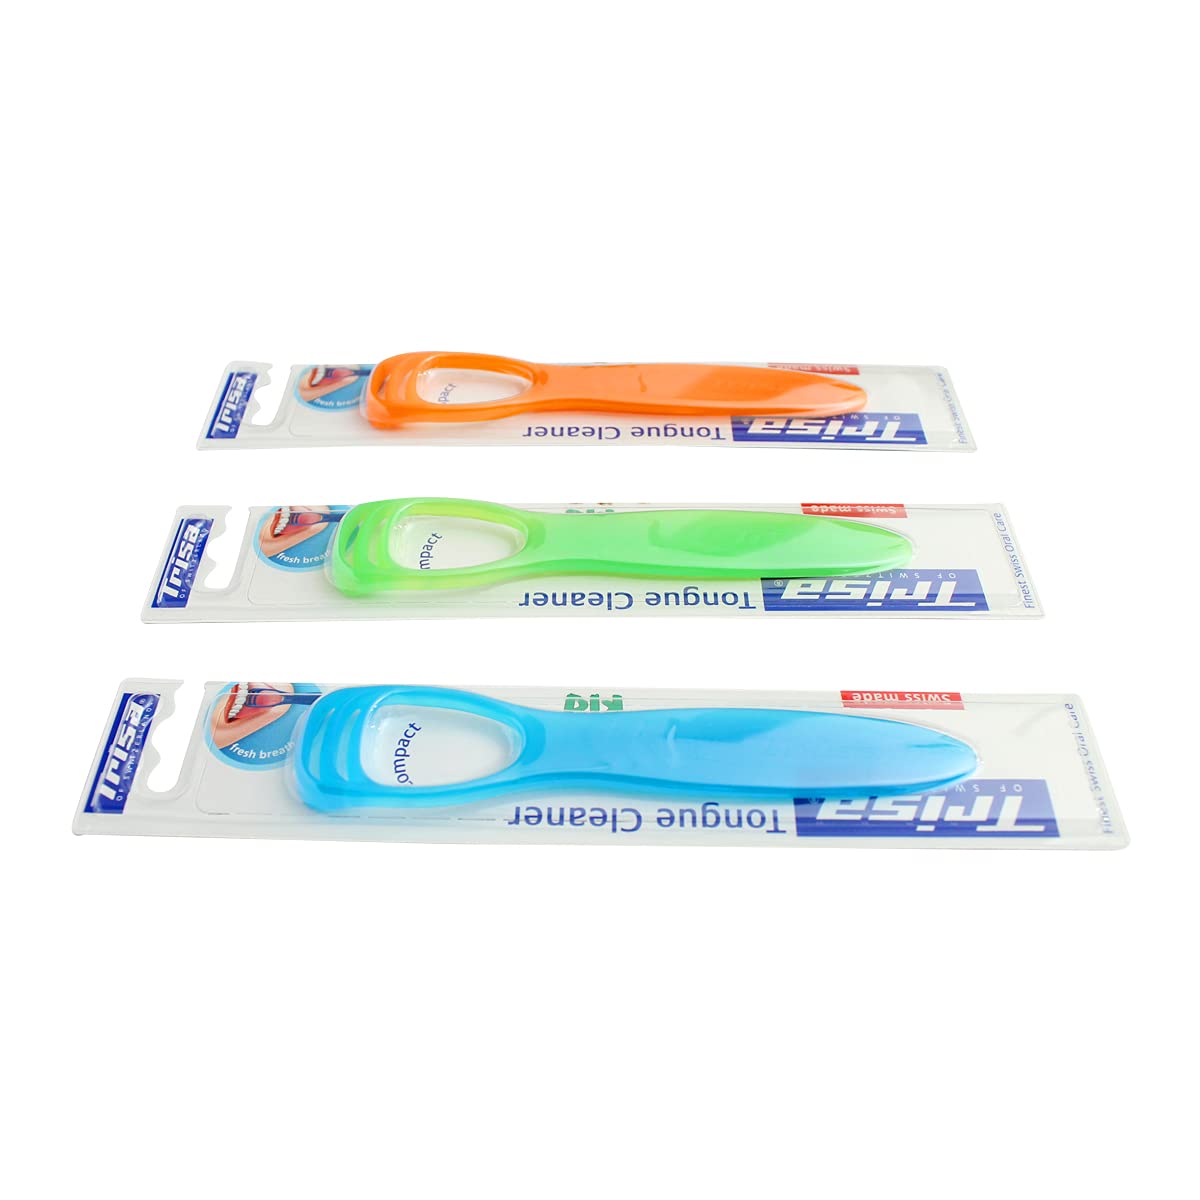 Trisa Swiss Kids Tongue Cleaner, Assorted Colors